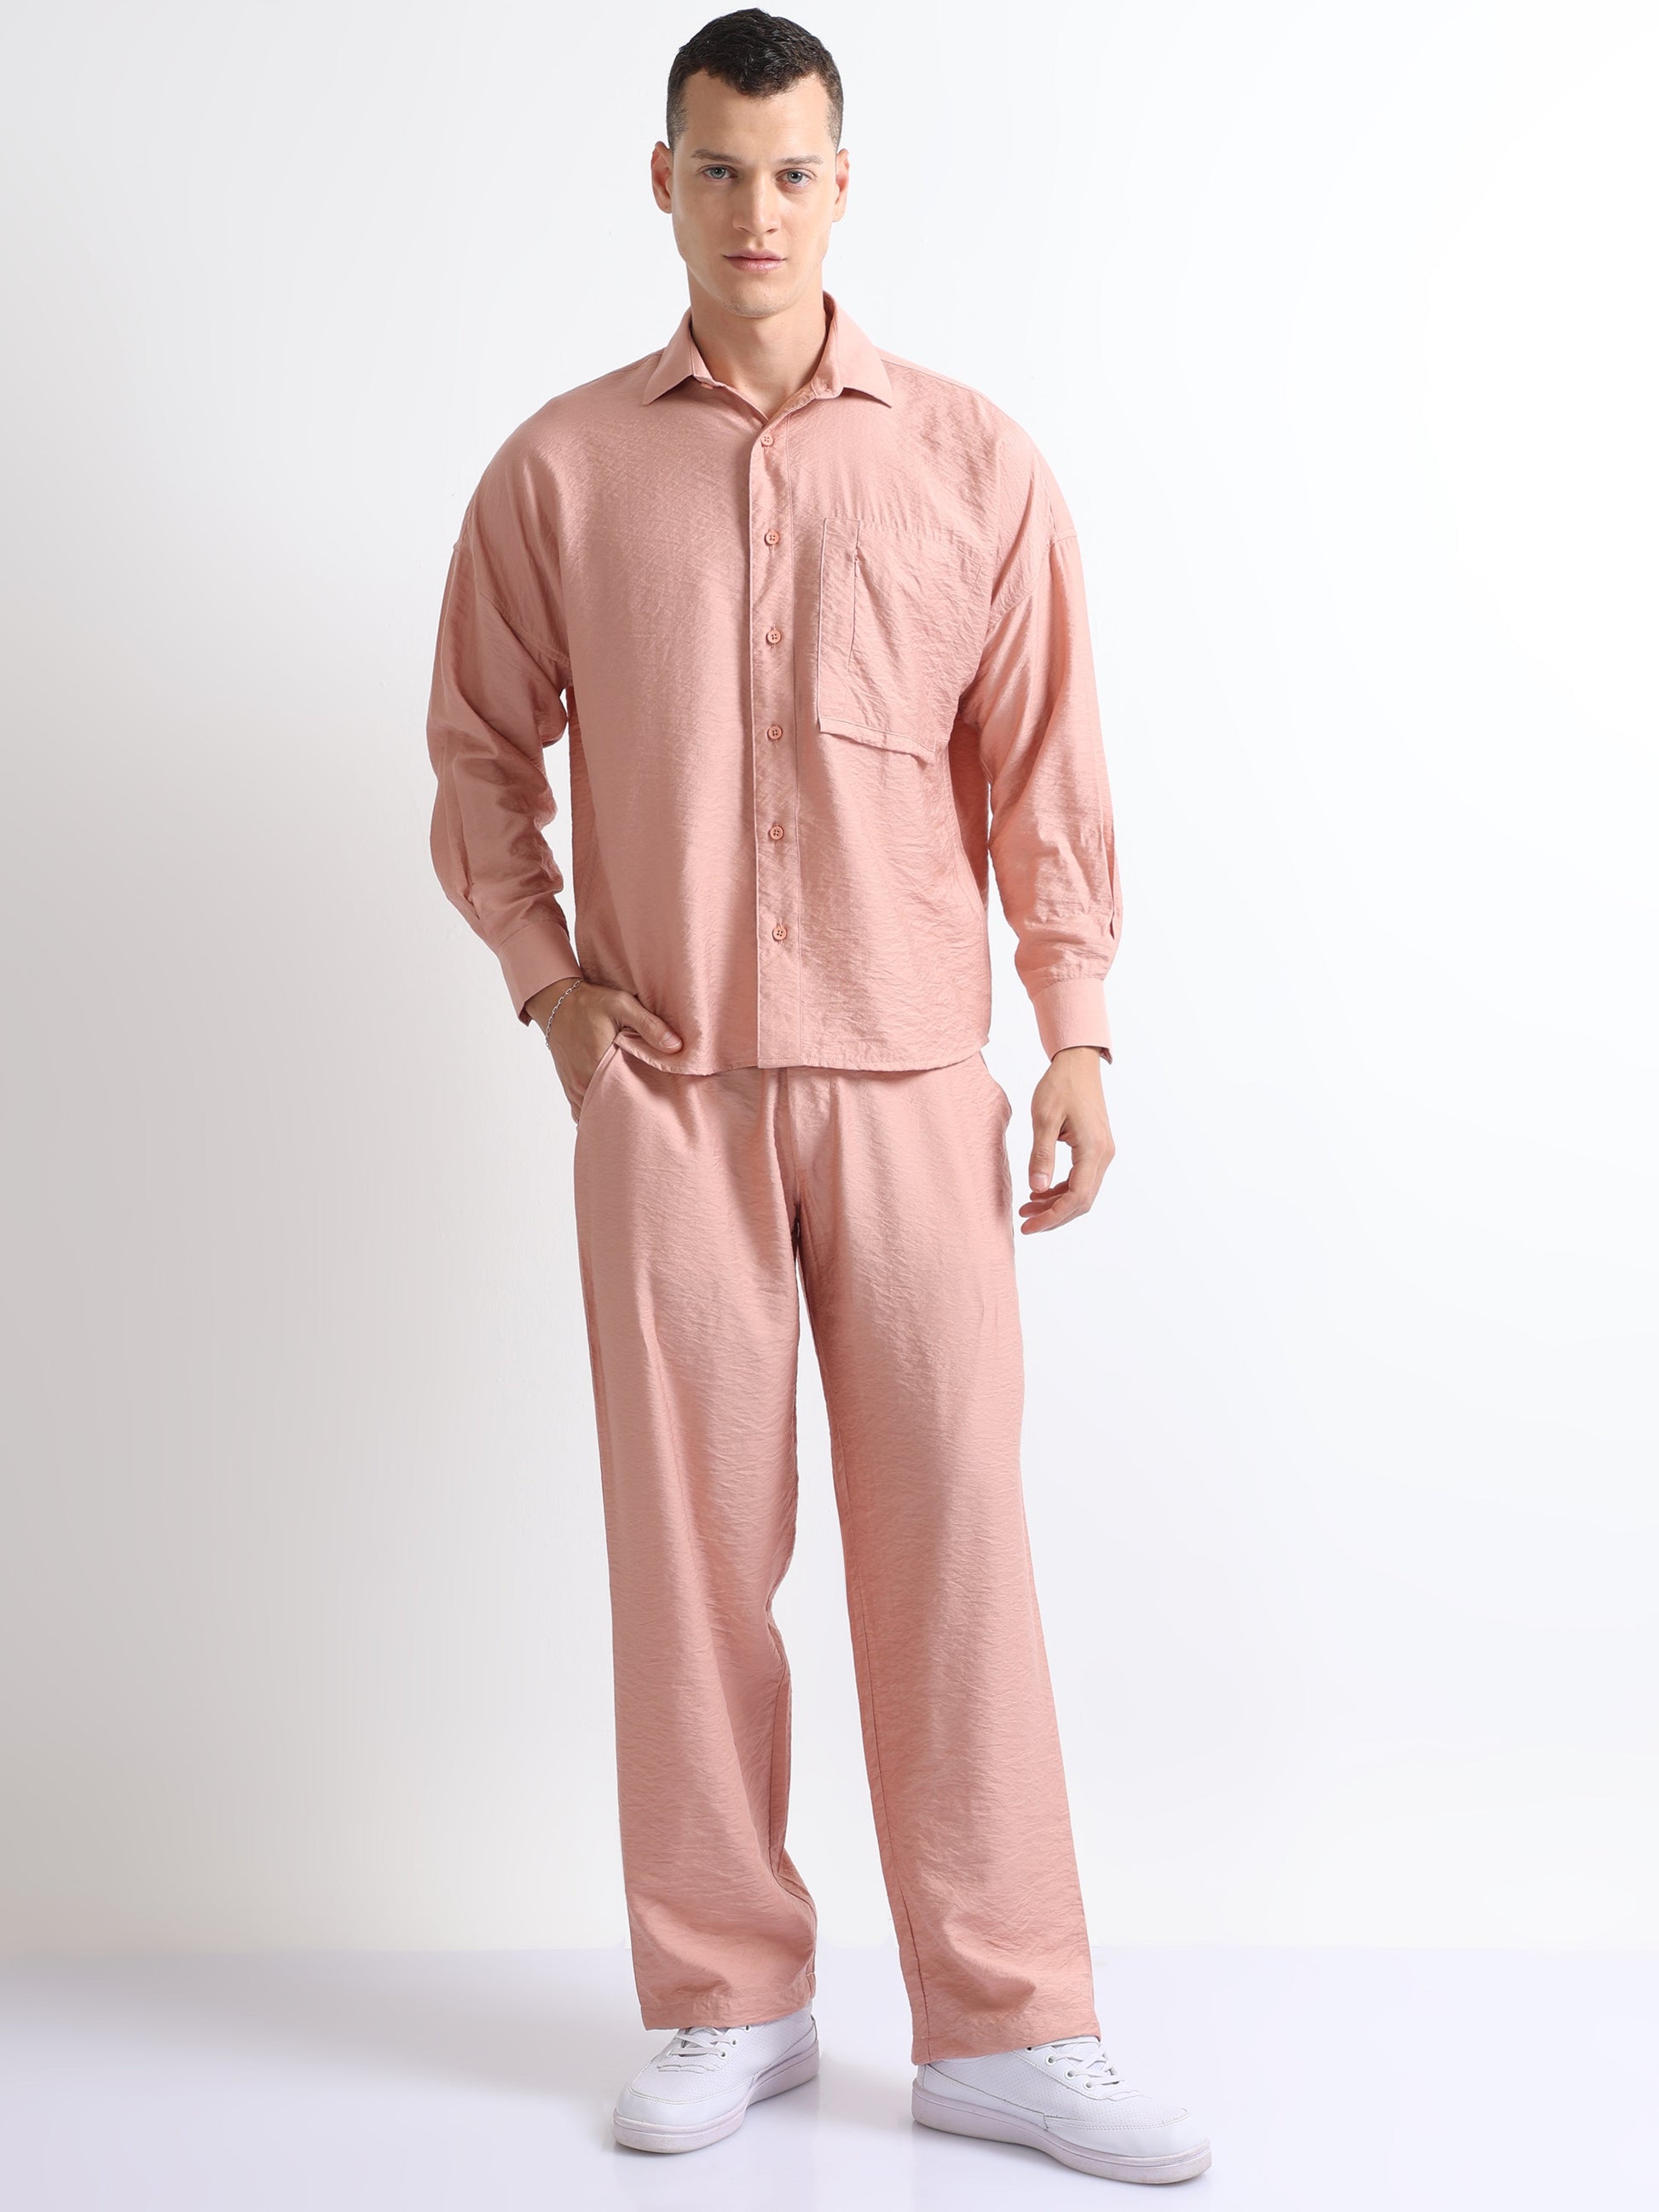 Buy Imorted Stylish Co-Ords Set For Mens Online.